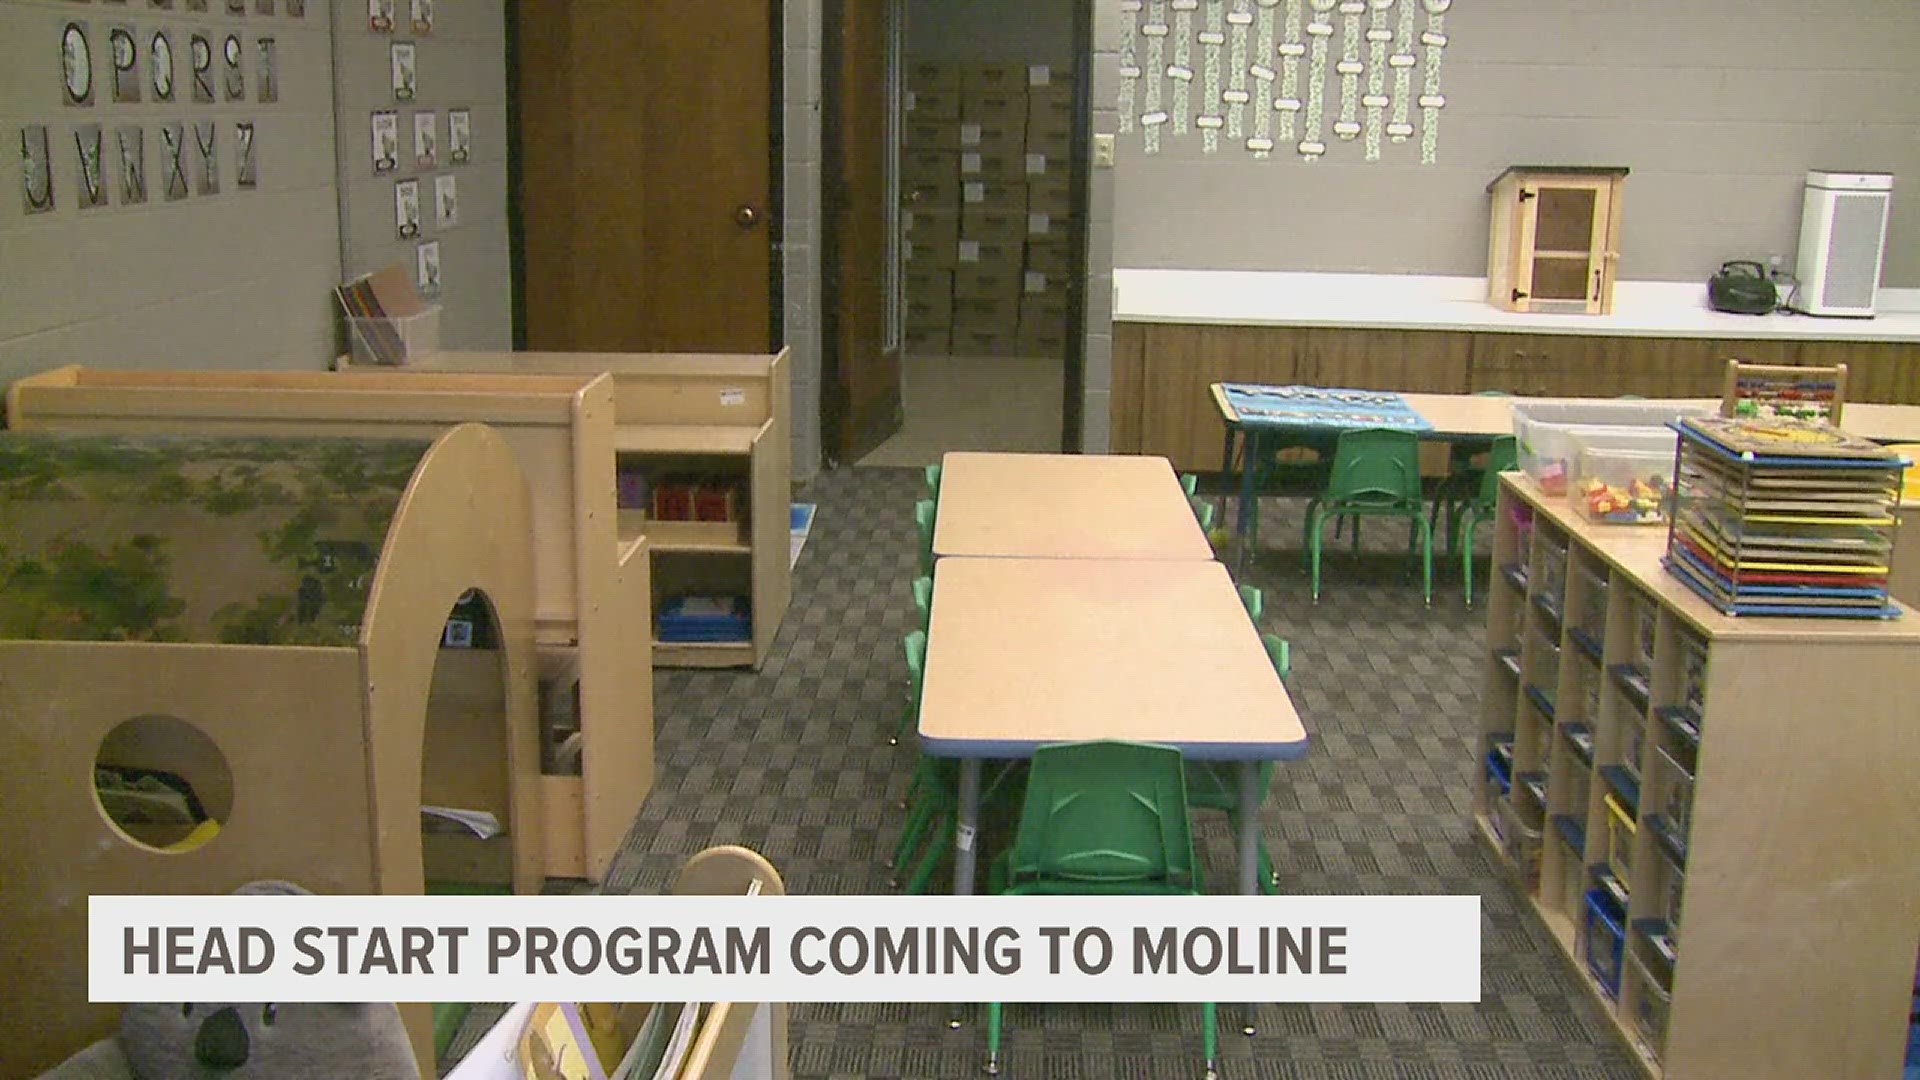 The classrooms will have up to 80 students, hoping to help families with childcare.